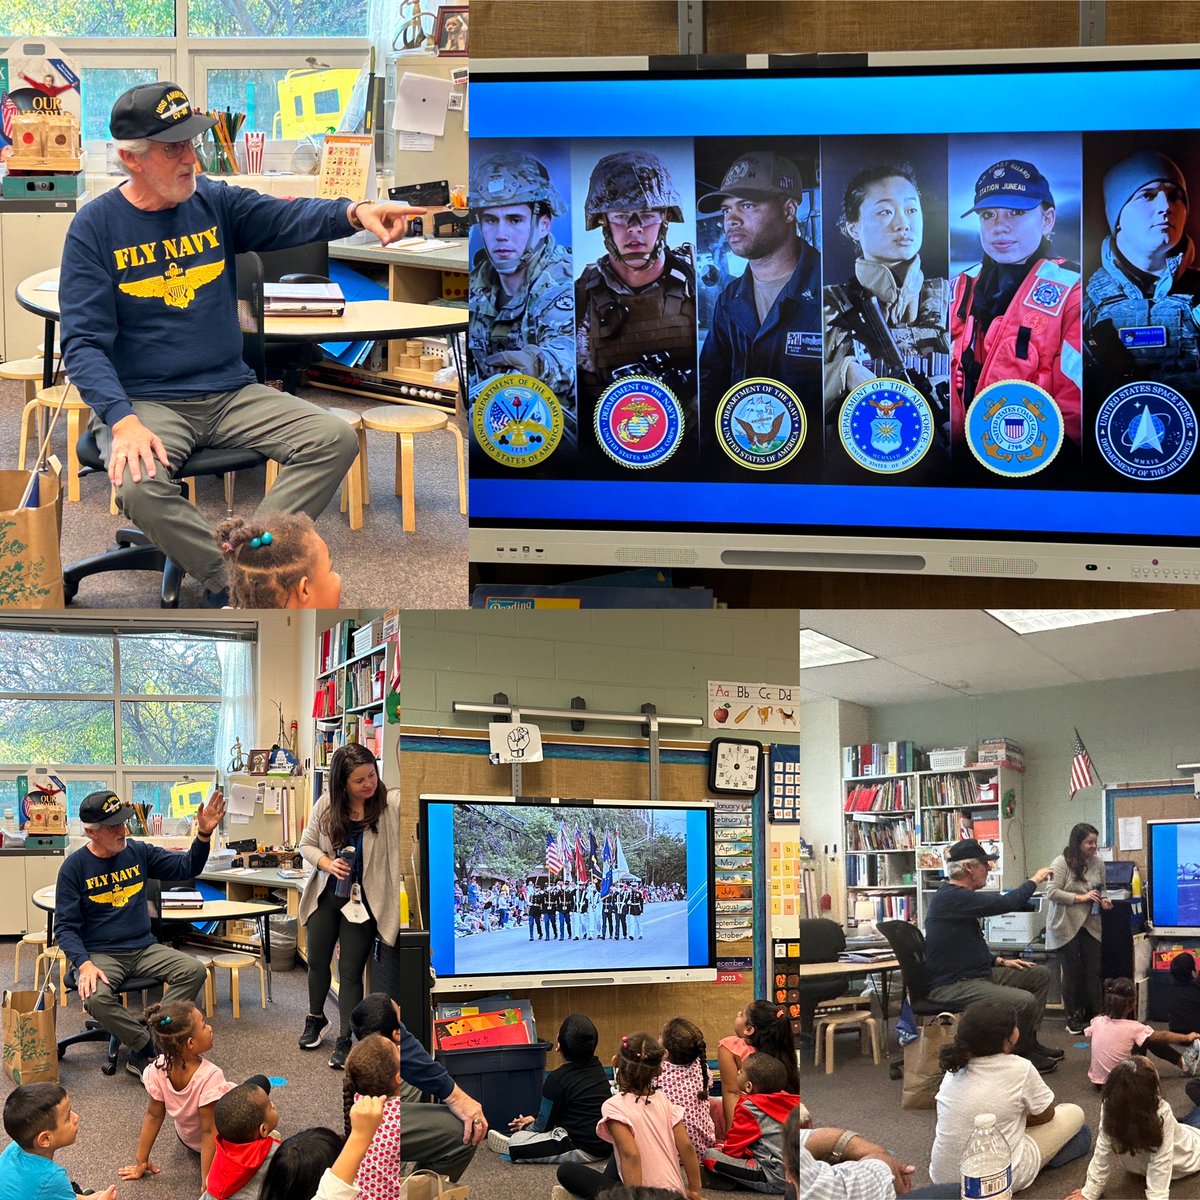 Thank you to retired APS teacher, Mr. Cleveland, for volunteering & visiting our <a target='_blank' href='http://twitter.com/apscspr'>@apscspr</a> classes to talk about the six branches of service in the military and your service in the Navy. Happy Veterans Day! <a target='_blank' href='http://search.twitter.com/search?q=APSFACE'><a target='_blank' href='https://twitter.com/hashtag/APSFACE?src=hash'>#APSFACE</a></a> <a target='_blank' href='http://search.twitter.com/search?q=APSisAwesome'><a target='_blank' href='https://twitter.com/hashtag/APSisAwesome?src=hash'>#APSisAwesome</a></a> <a target='_blank' href='http://search.twitter.com/search?q=APSVolunteersAreBack'><a target='_blank' href='https://twitter.com/hashtag/APSVolunteersAreBack?src=hash'>#APSVolunteersAreBack</a></a> <a target='_blank' href='https://t.co/1GWU6Qx45W'>https://t.co/1GWU6Qx45W</a>